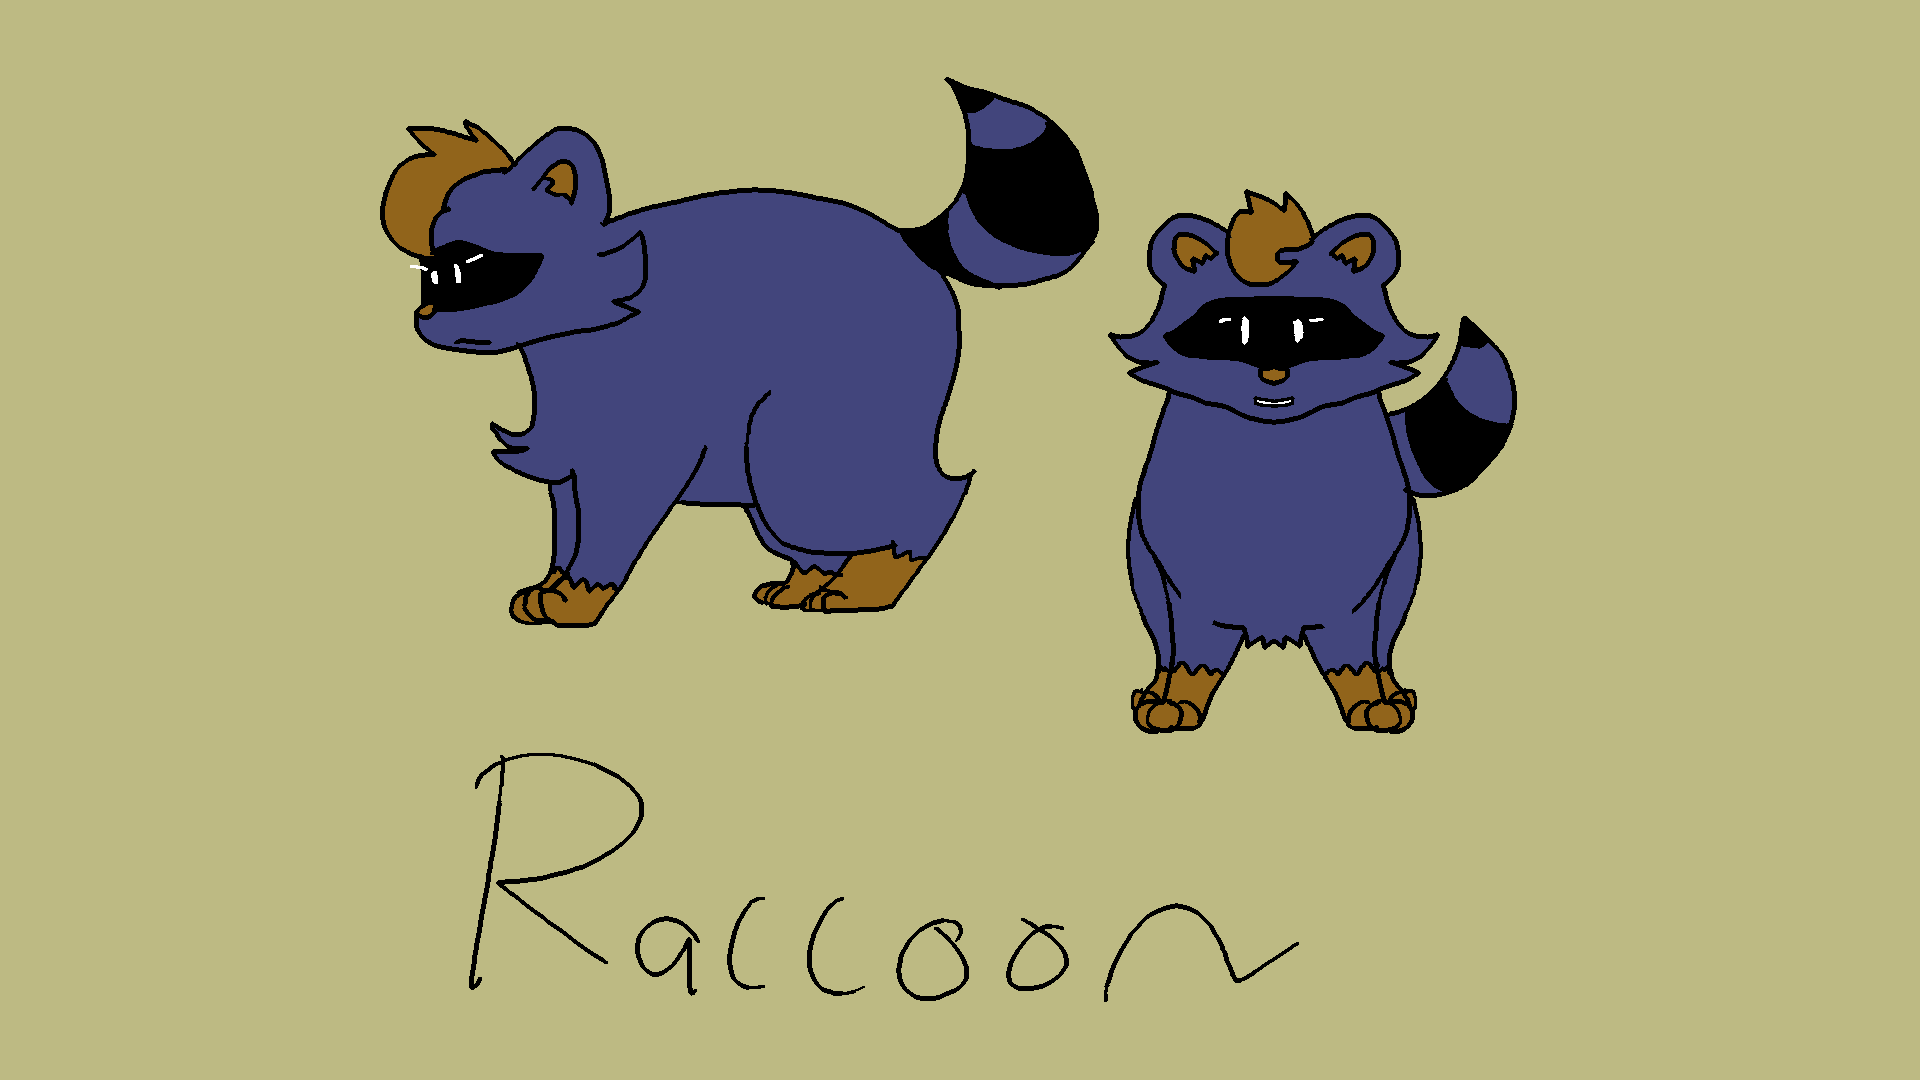 Blue raccoon with black stripes and brown hair